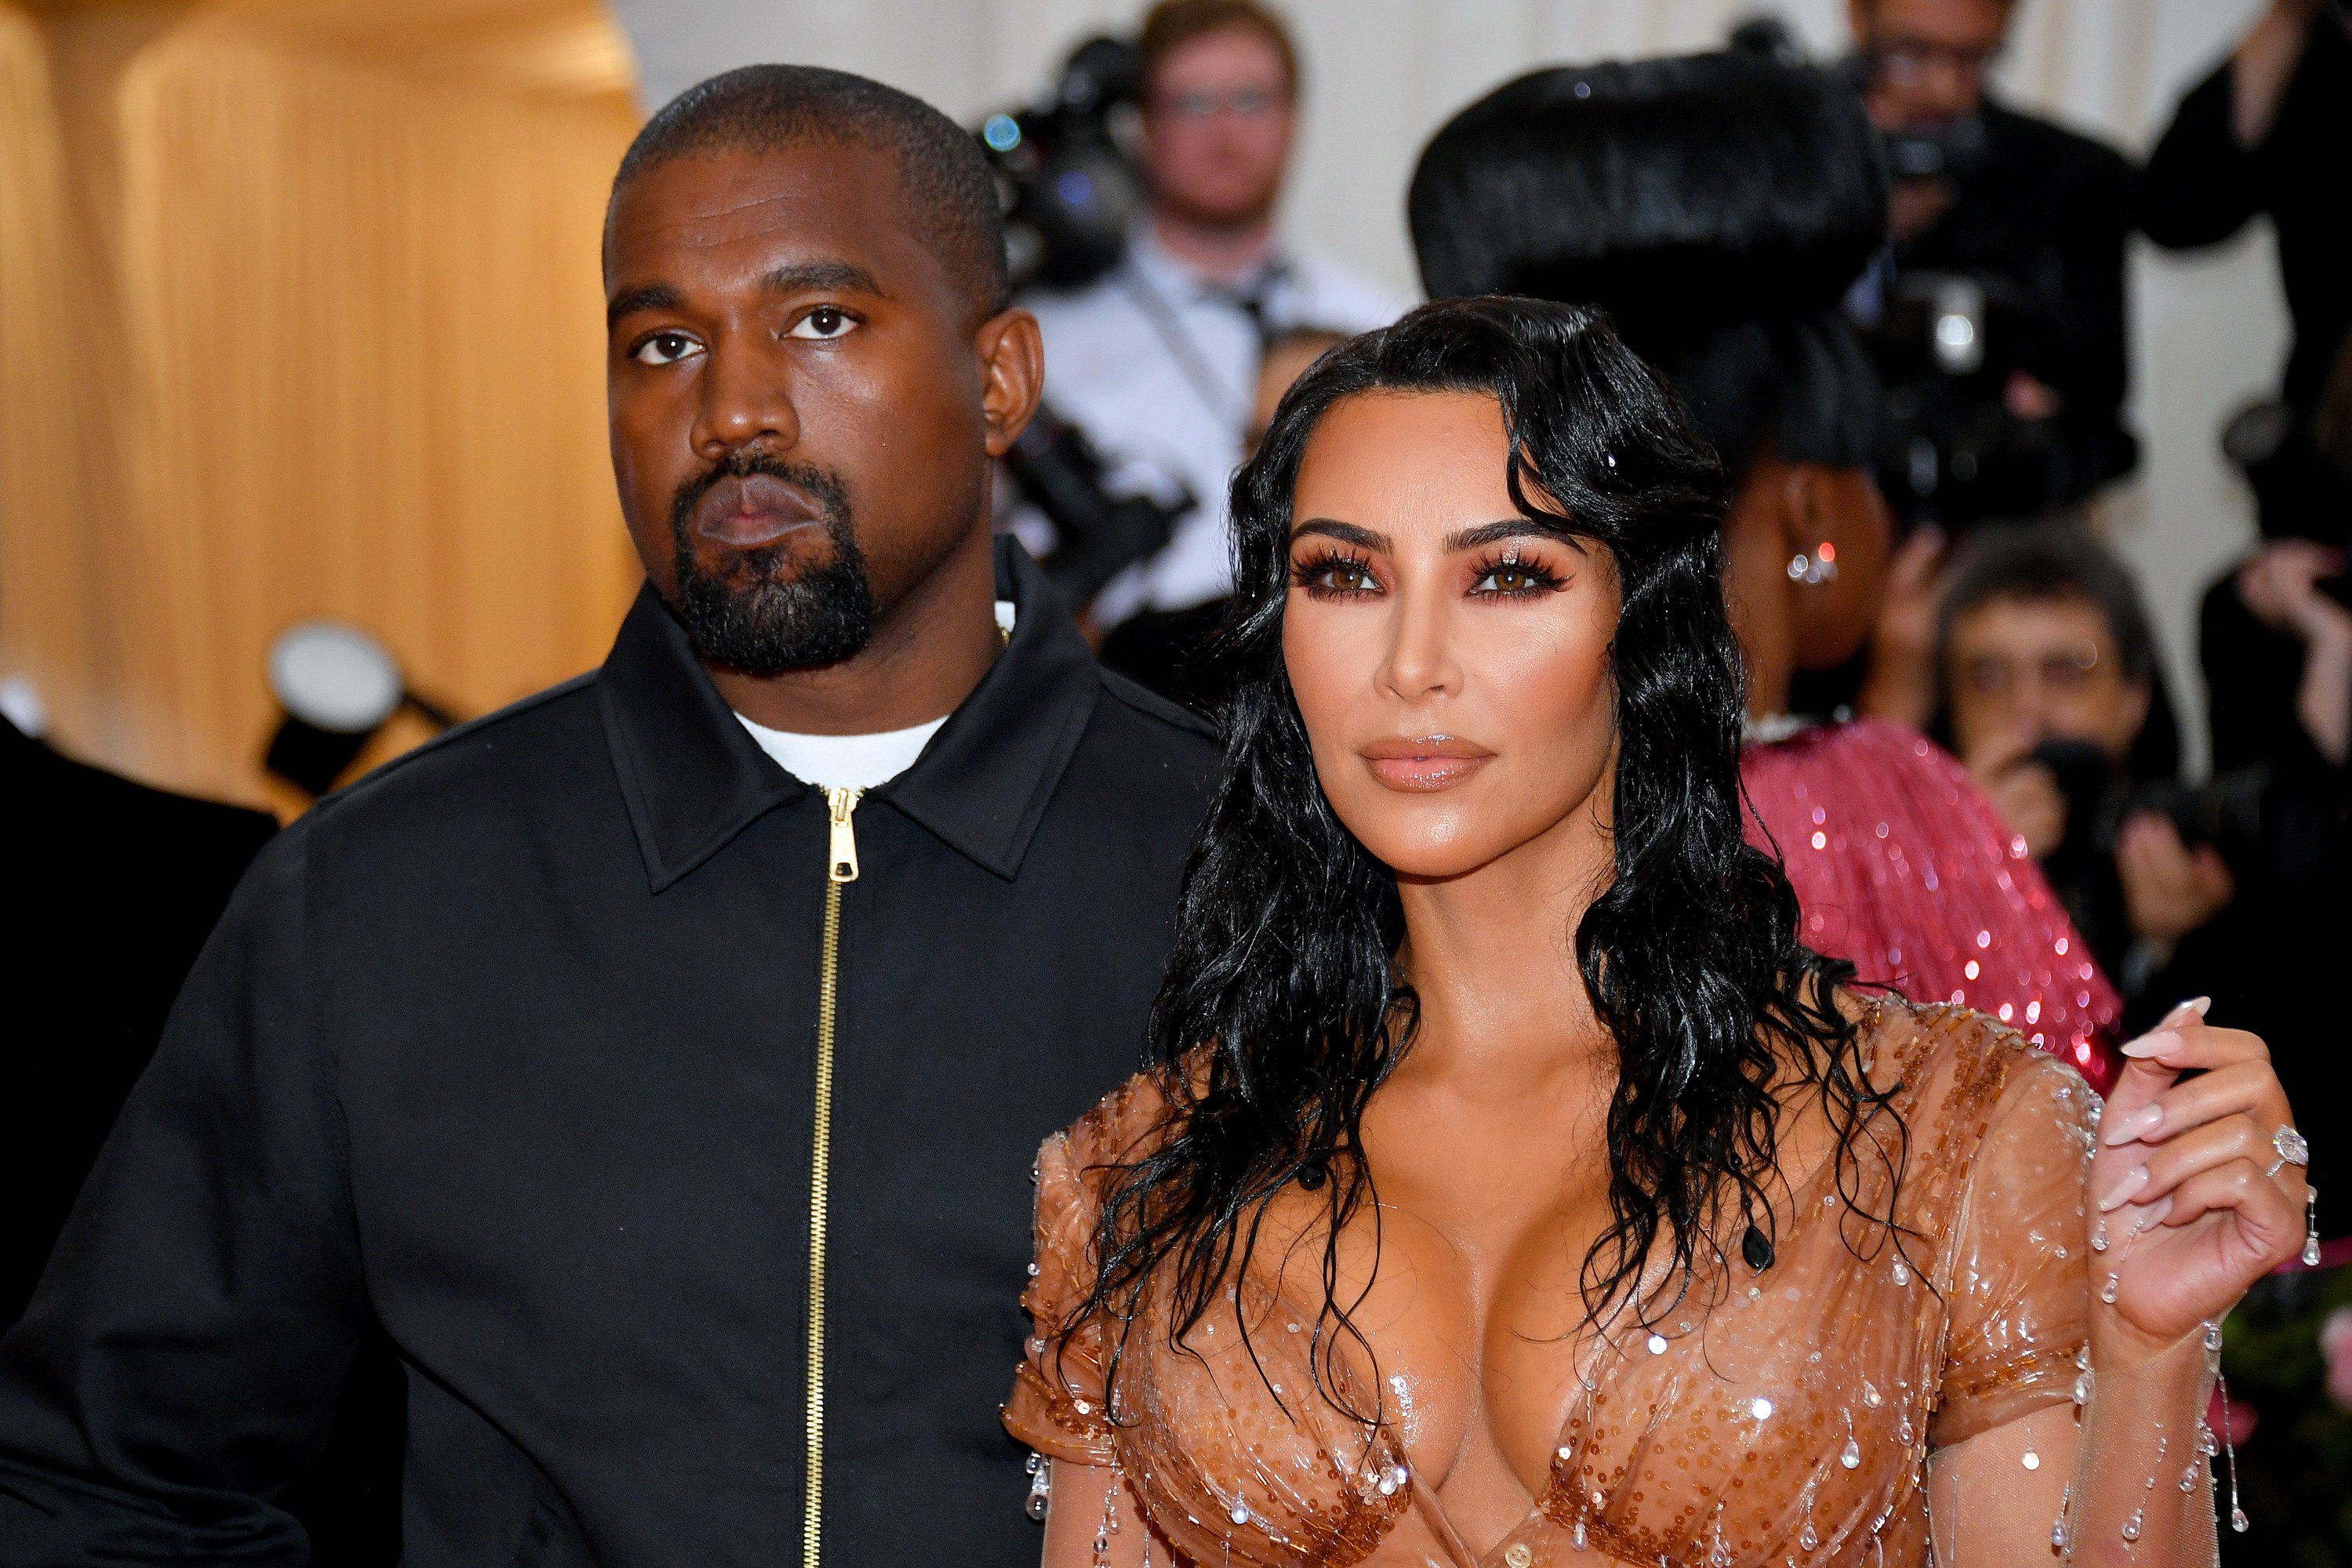 Kim Kardashian Spotted With Kanye West Ahead of Her SNL Debut